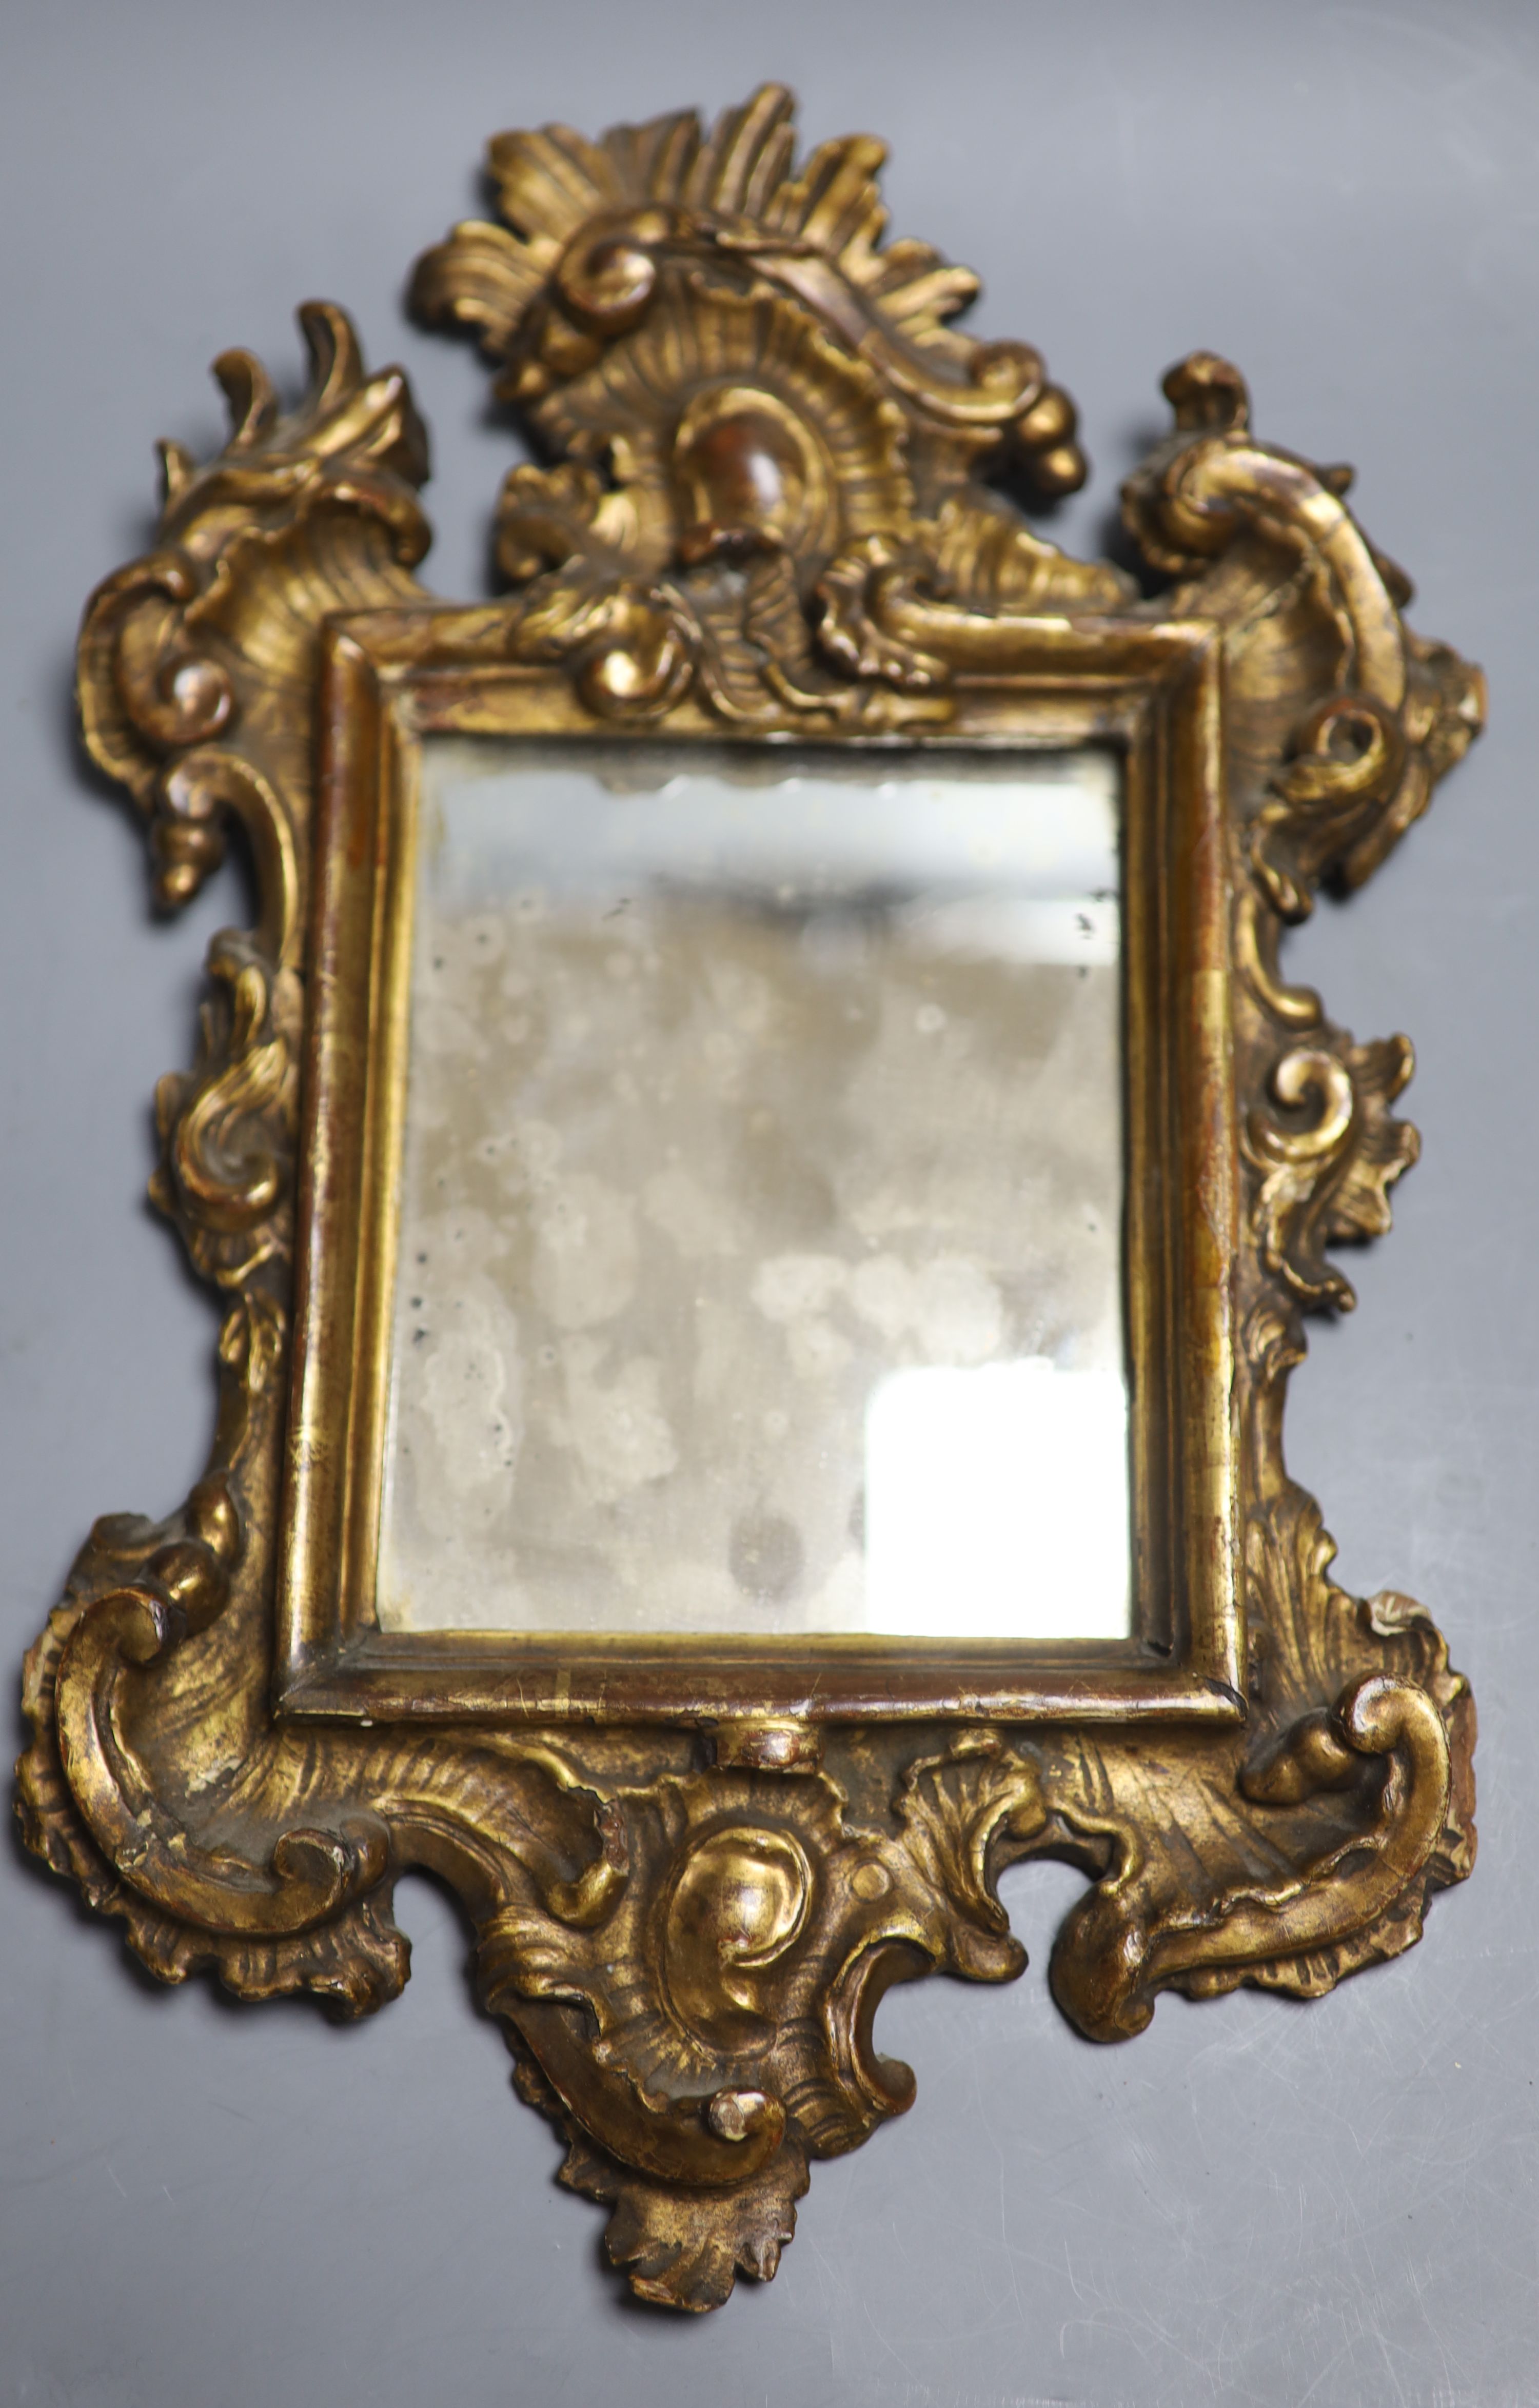 A small 18th century Italian carved giltwood mirror, overall length 38cm